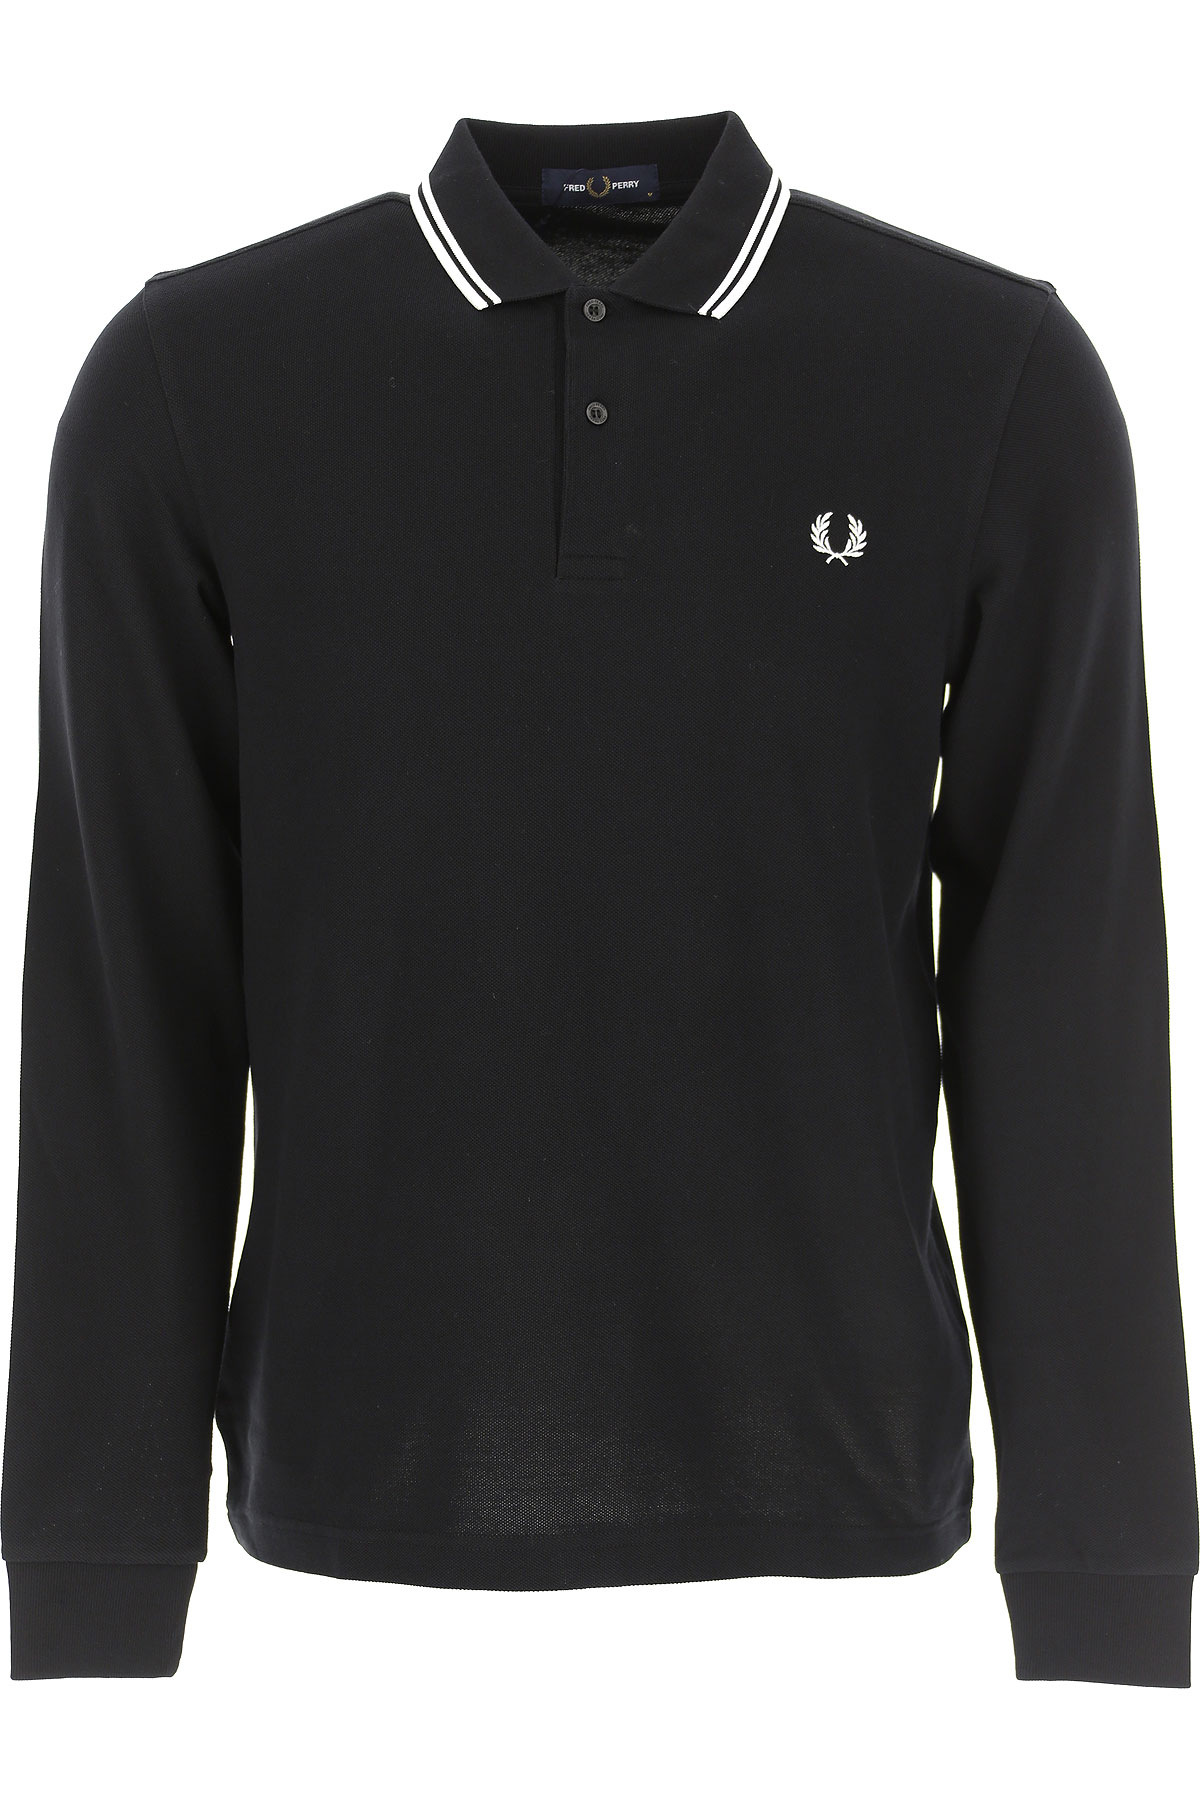 Mens Clothing Fred Perry, Style code: m3636-102-